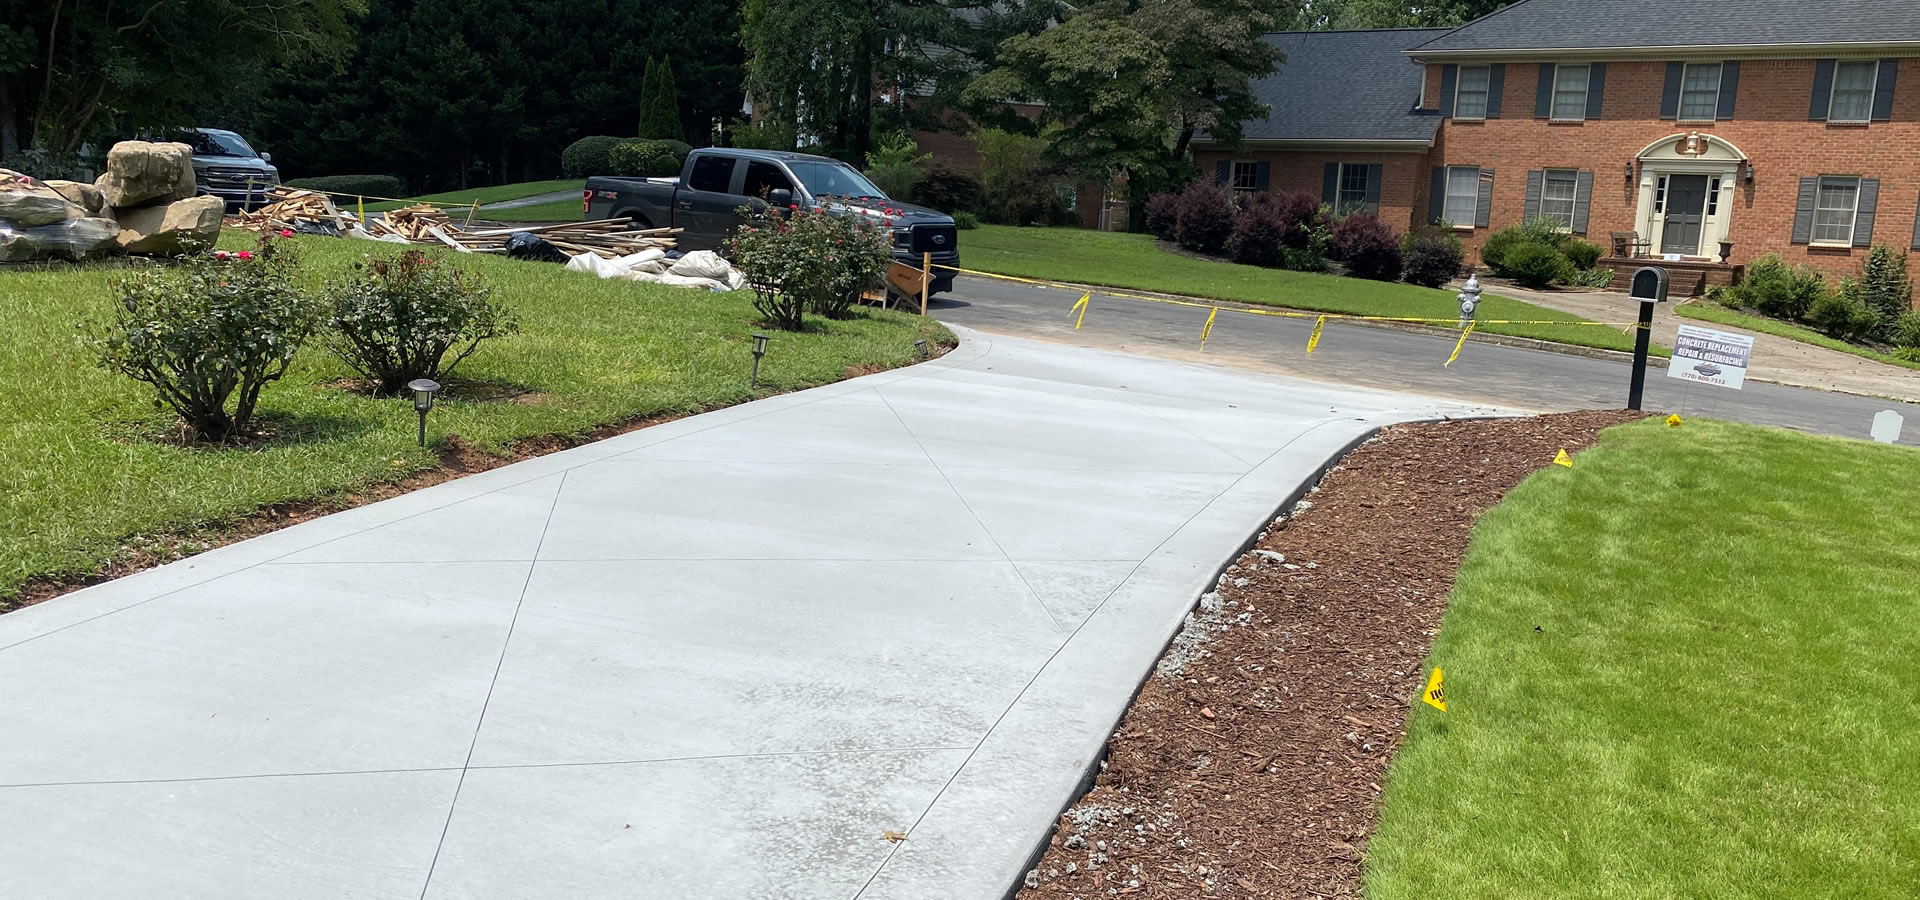 When Should I Replace My Concrete Driveway?